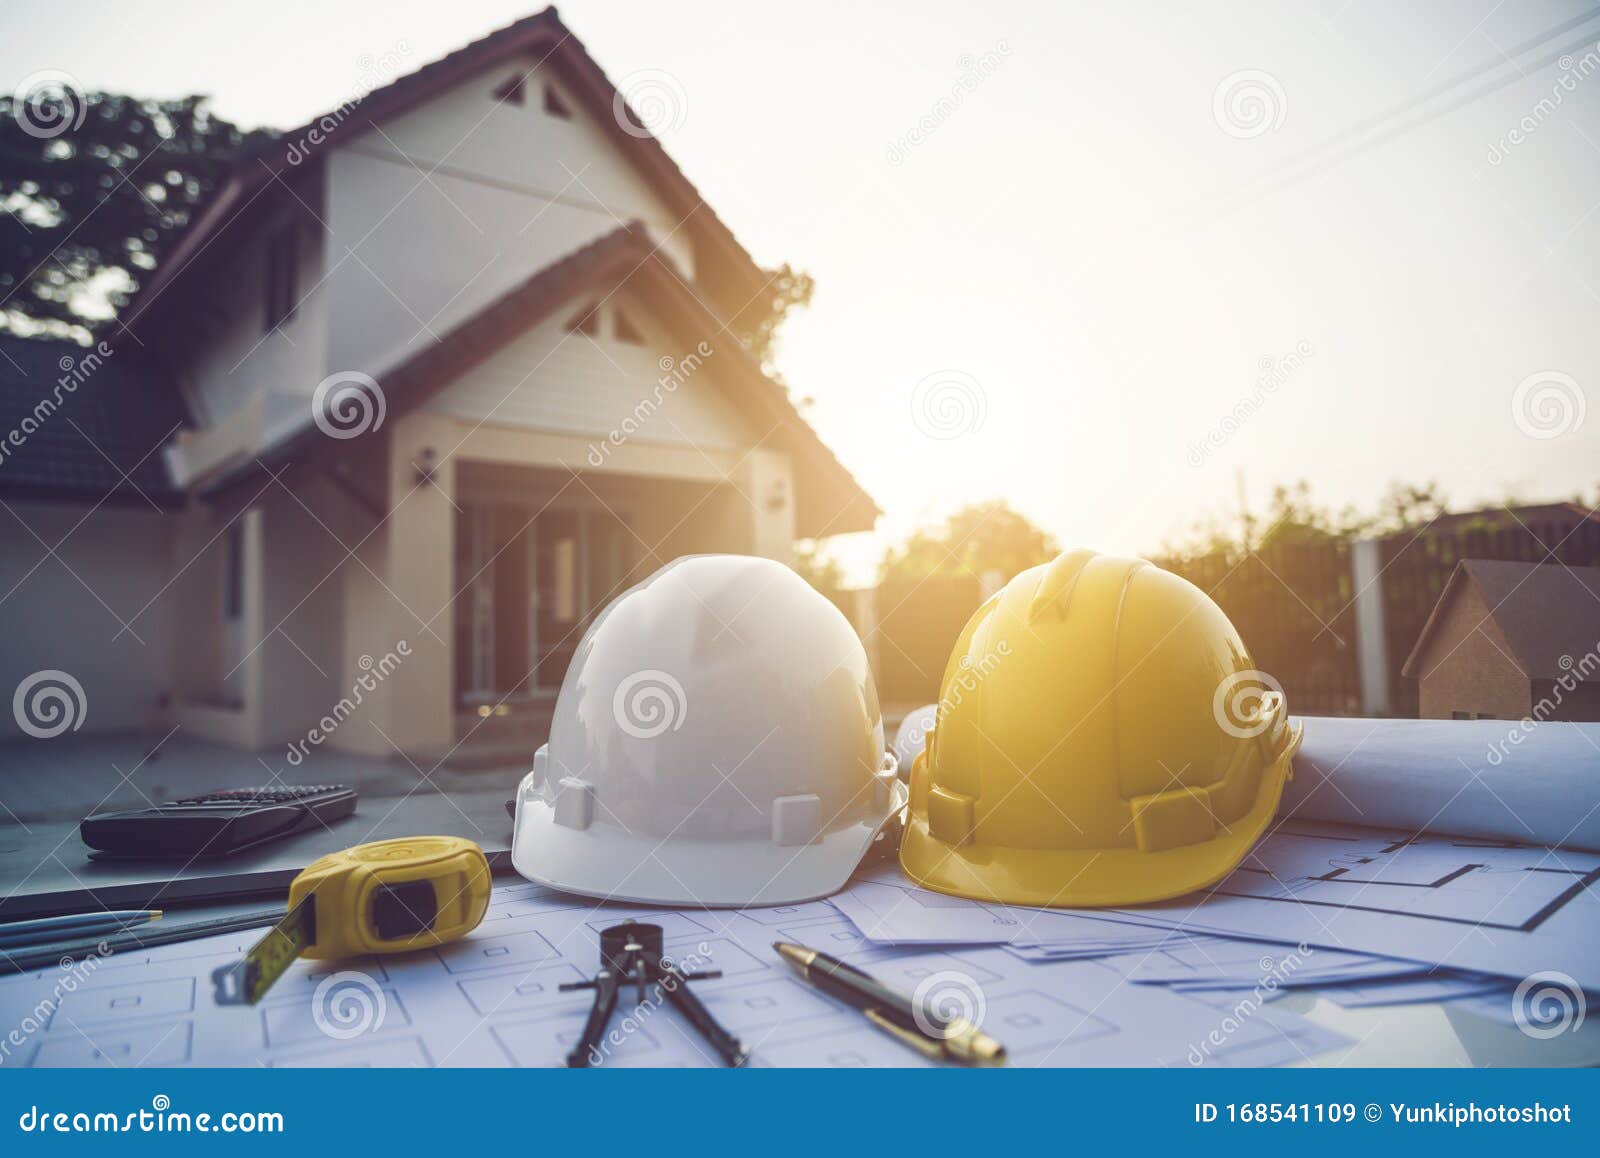 house architect engineer nobody work construction blueprint house cost estimator, cost to build a home